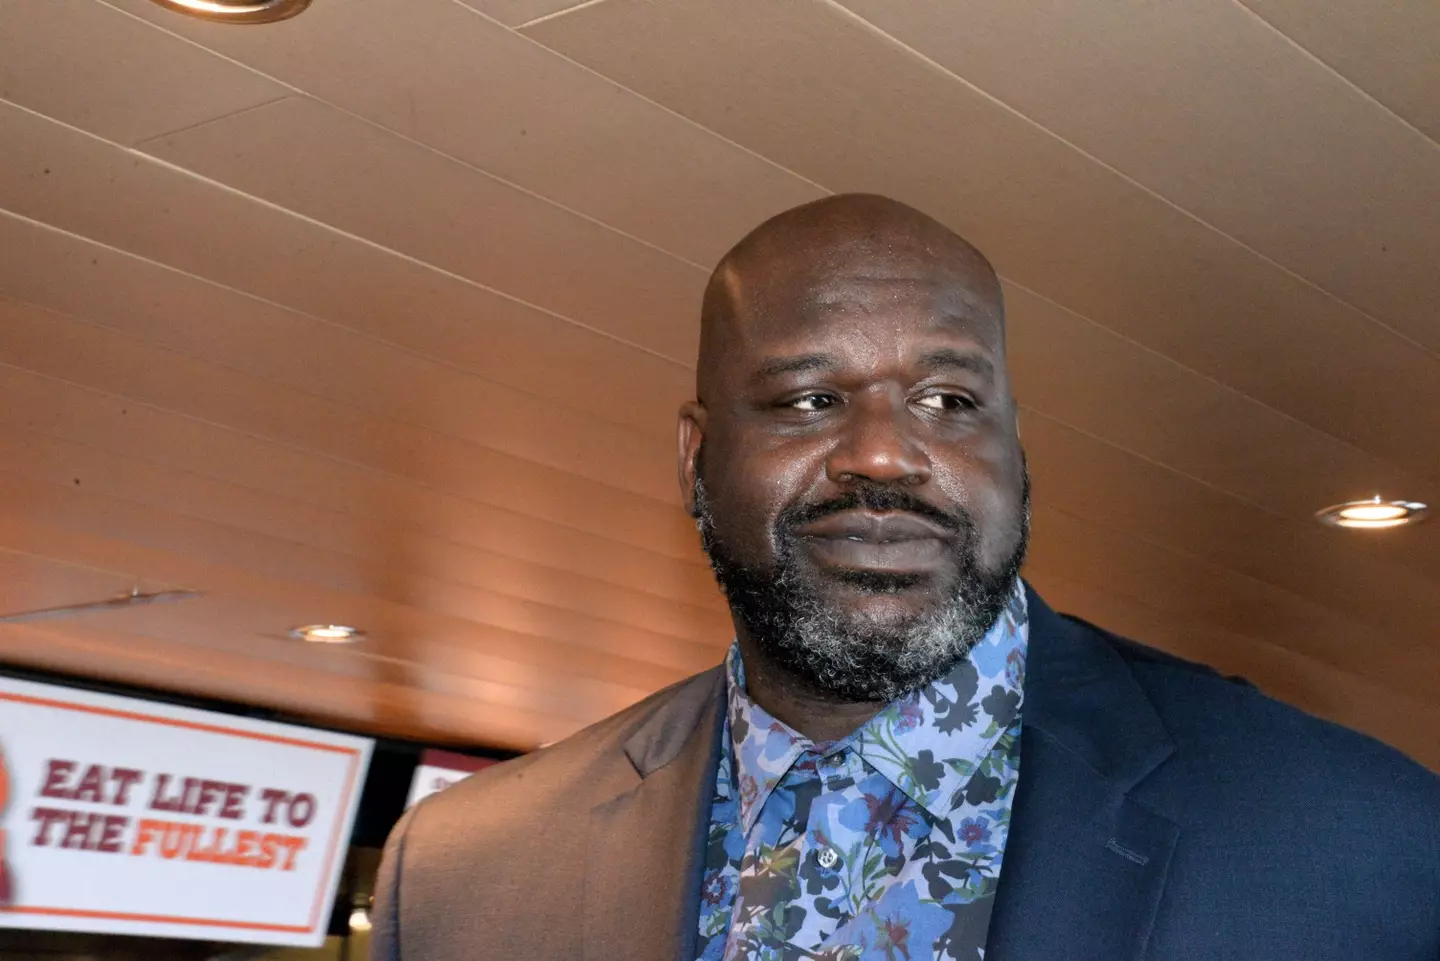 Shaquille O’Neal would be interested in partnering with Jeff Bezos.